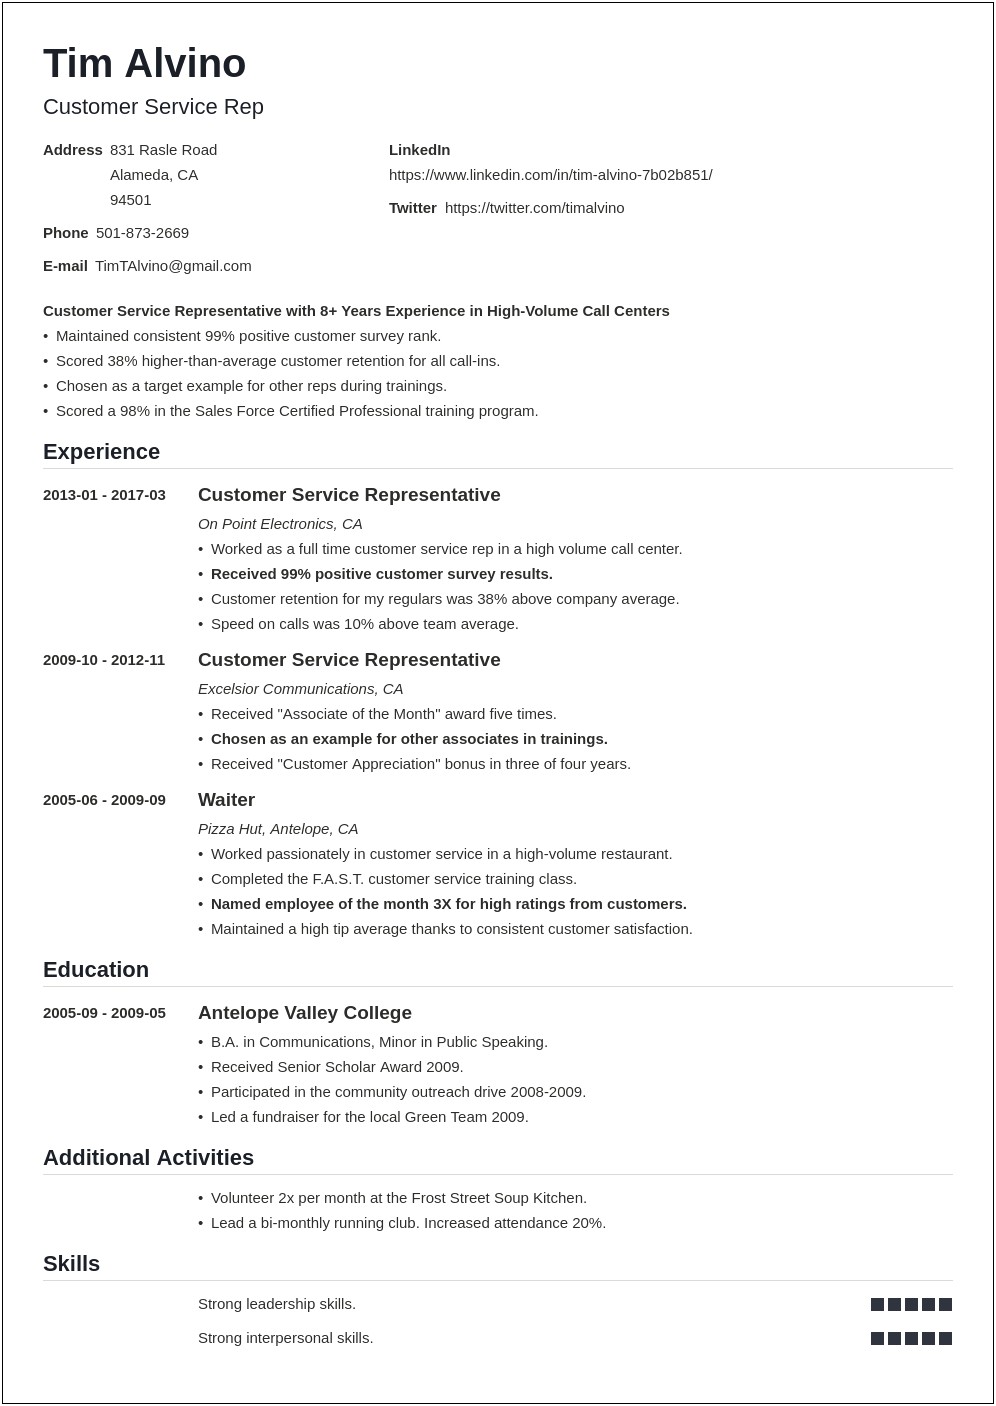 General Resume Objective Examples For Multiple Jobs